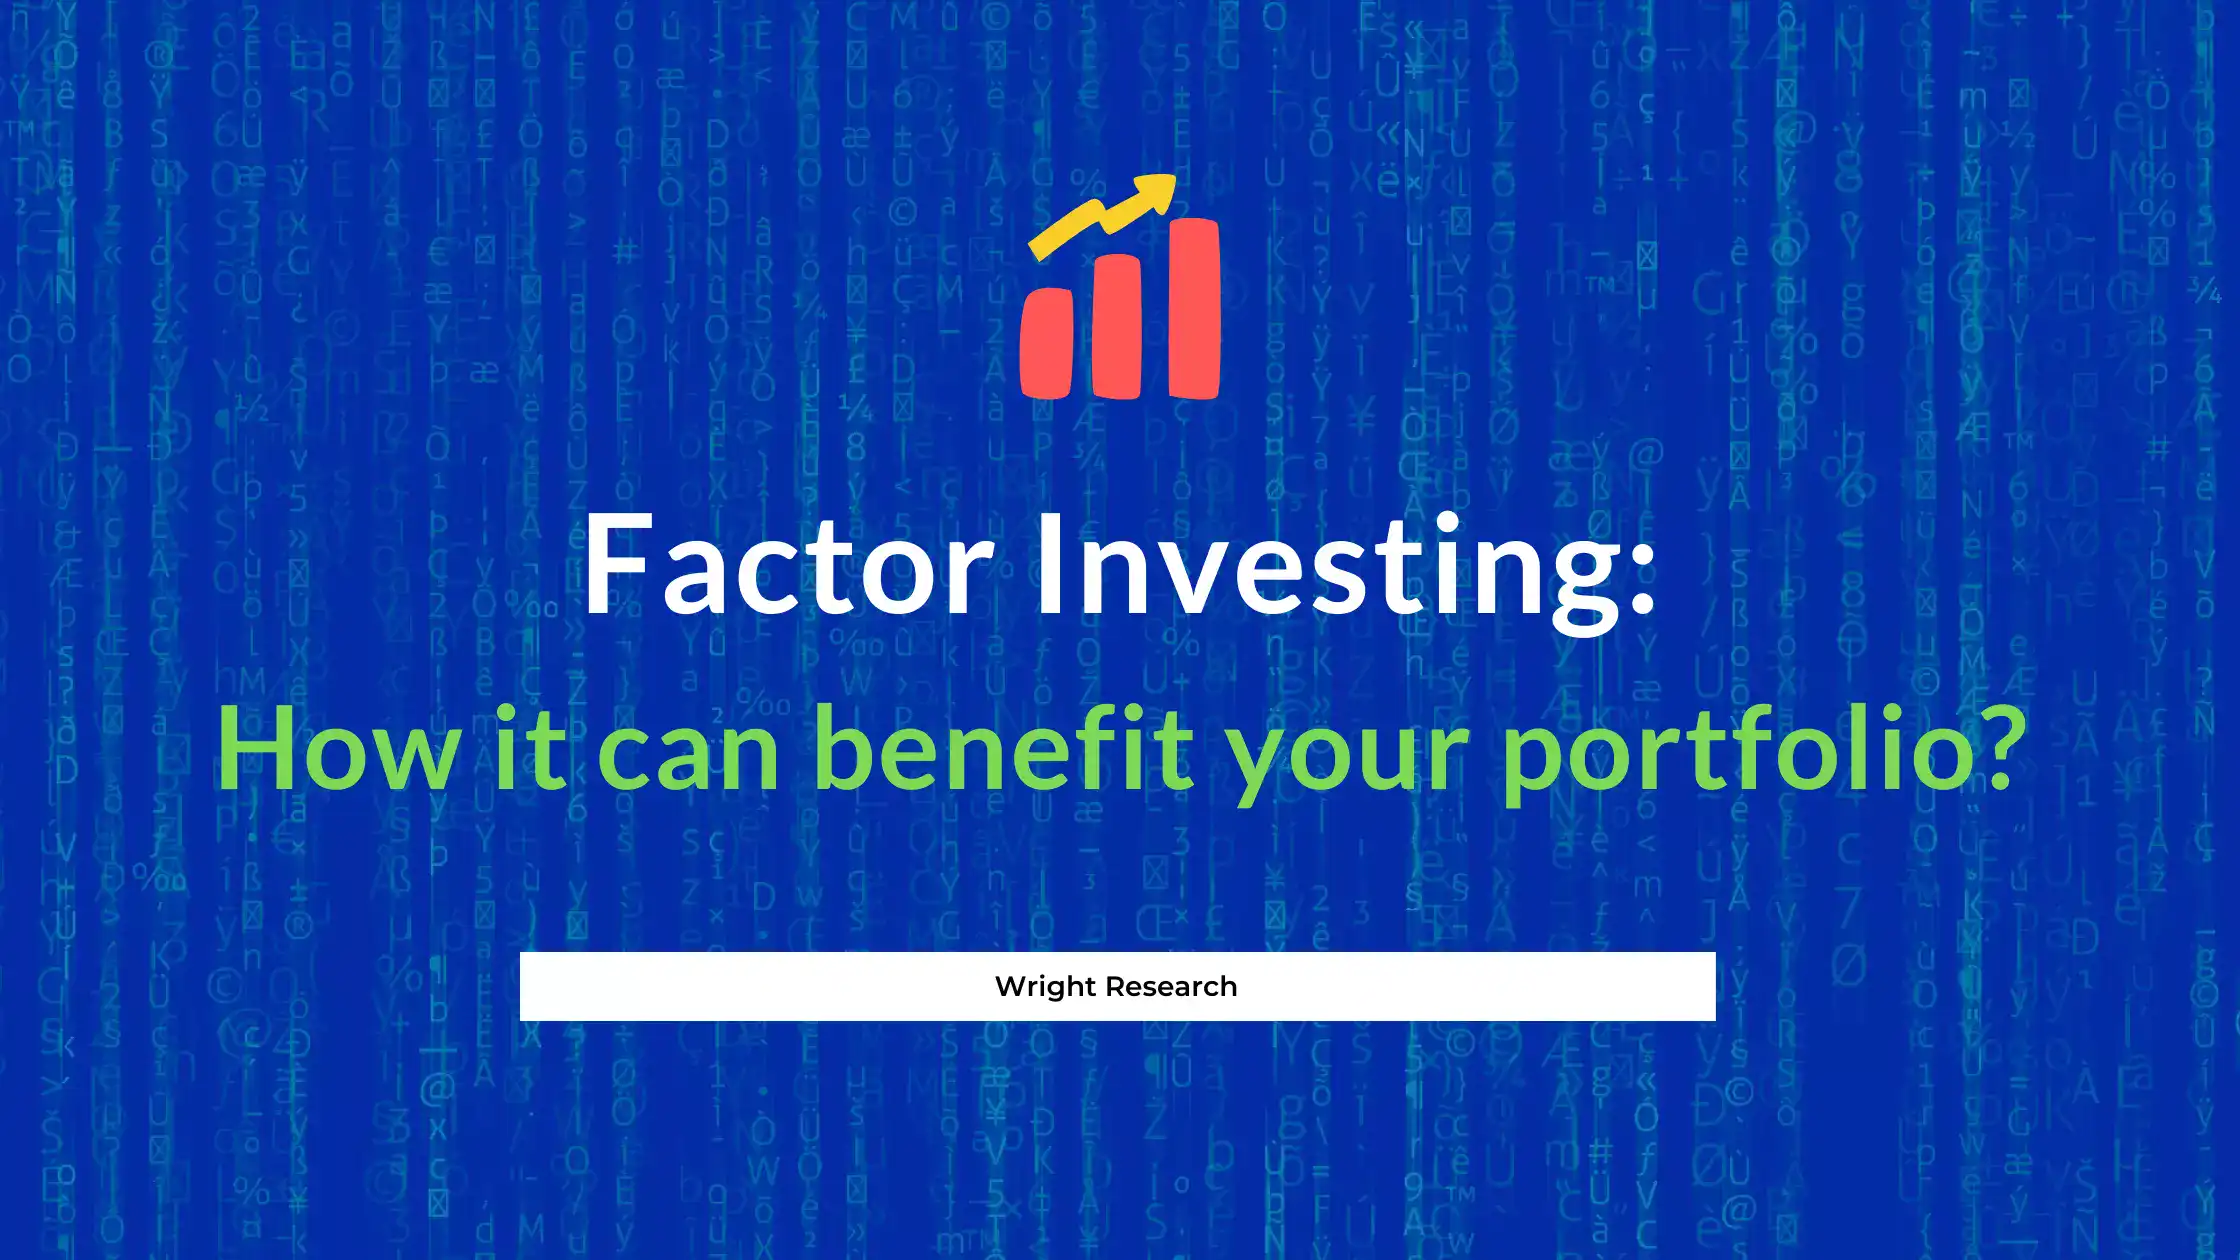 Heard about Factor Investing?